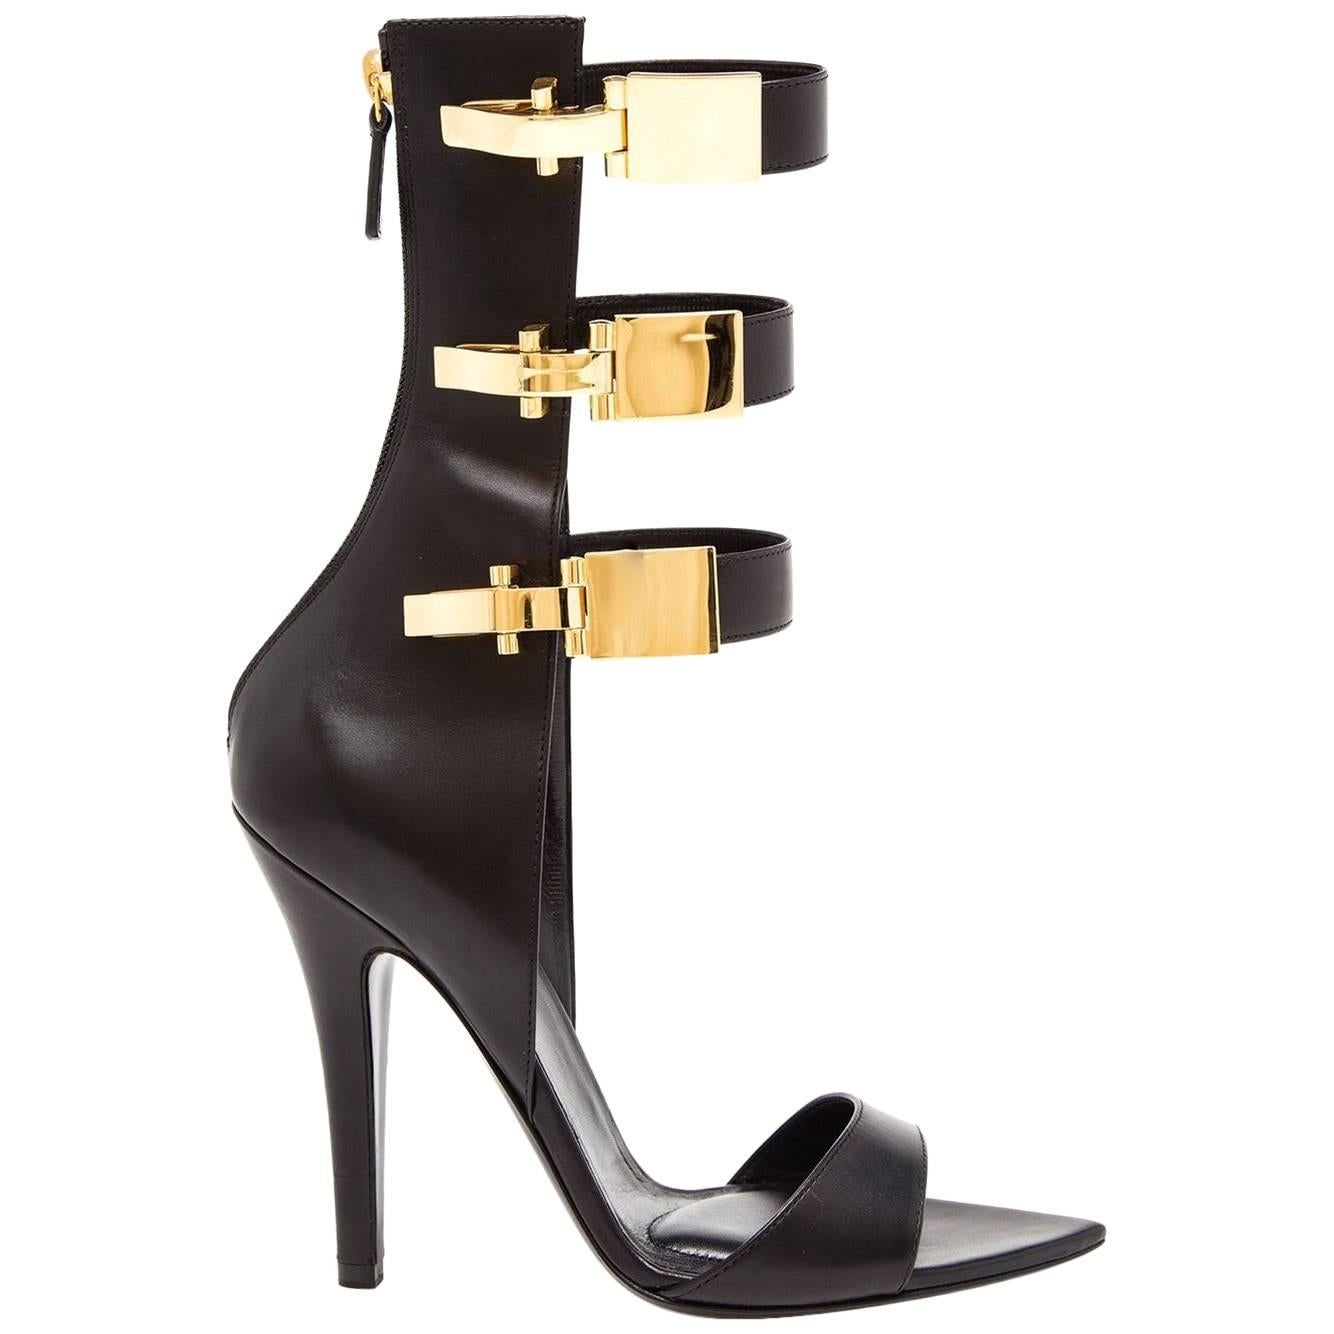 Versus x Anthony Vaccarello Black Leather Edition Sandals 